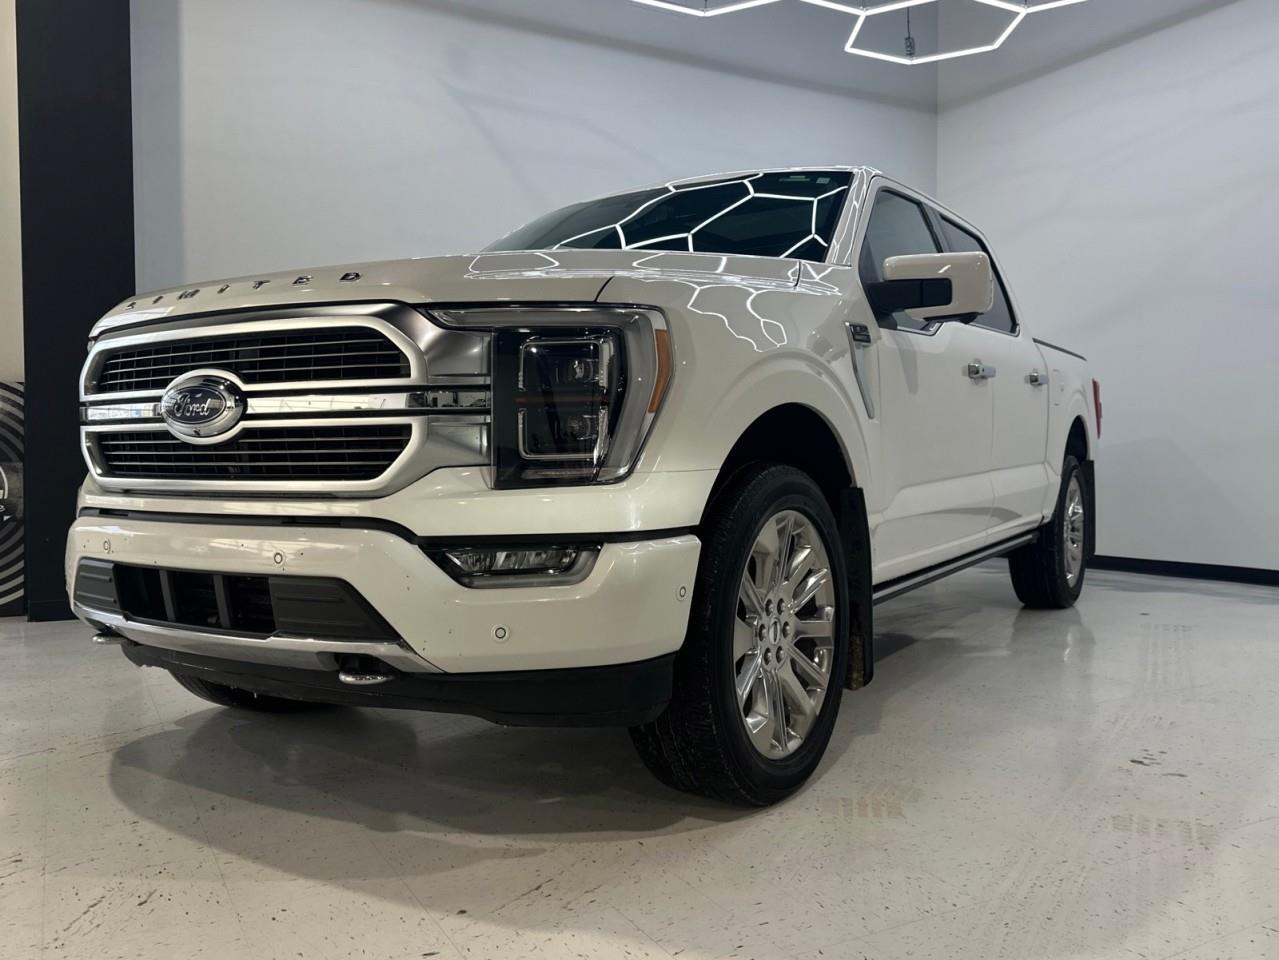 2021 Ford F-150 Consignment Vehicle that comes with the balance of